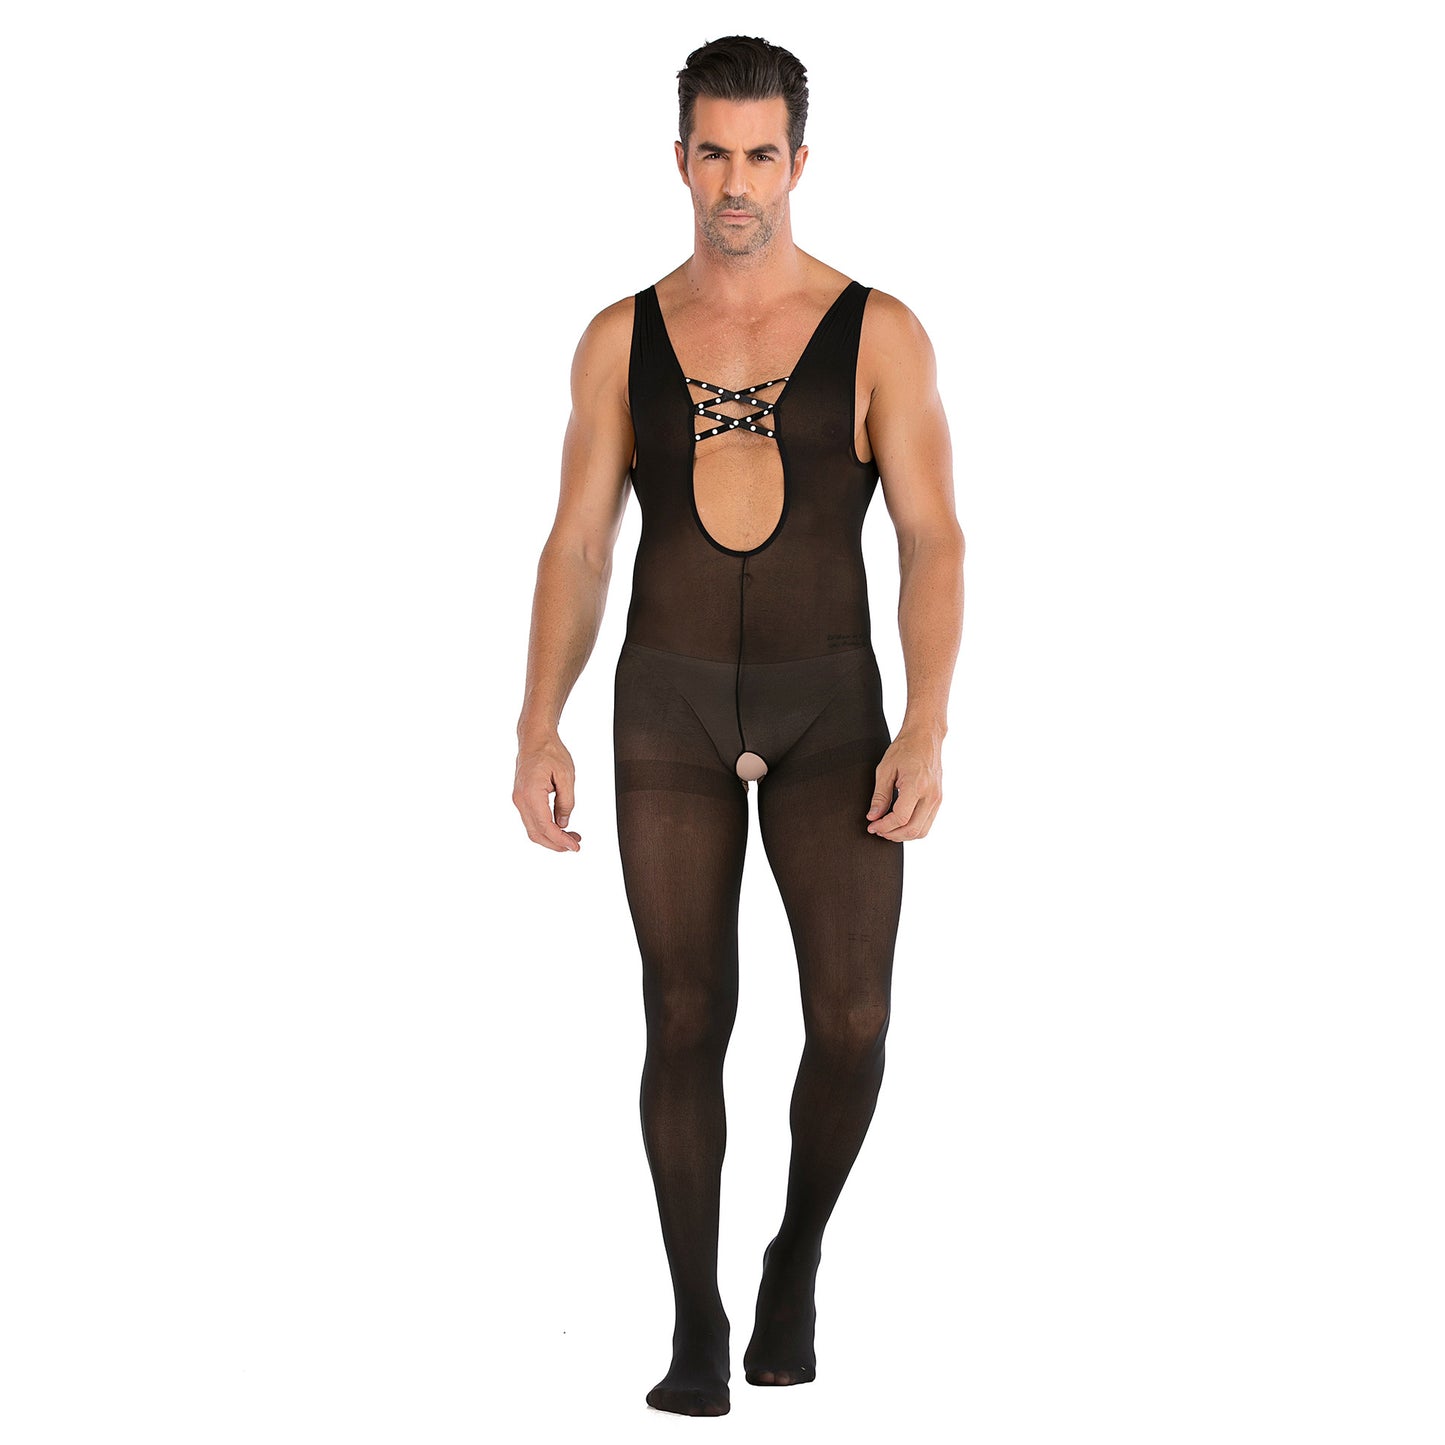 Men's Perspective One Piece Mesh Clothes Nightclub Stage Costumes